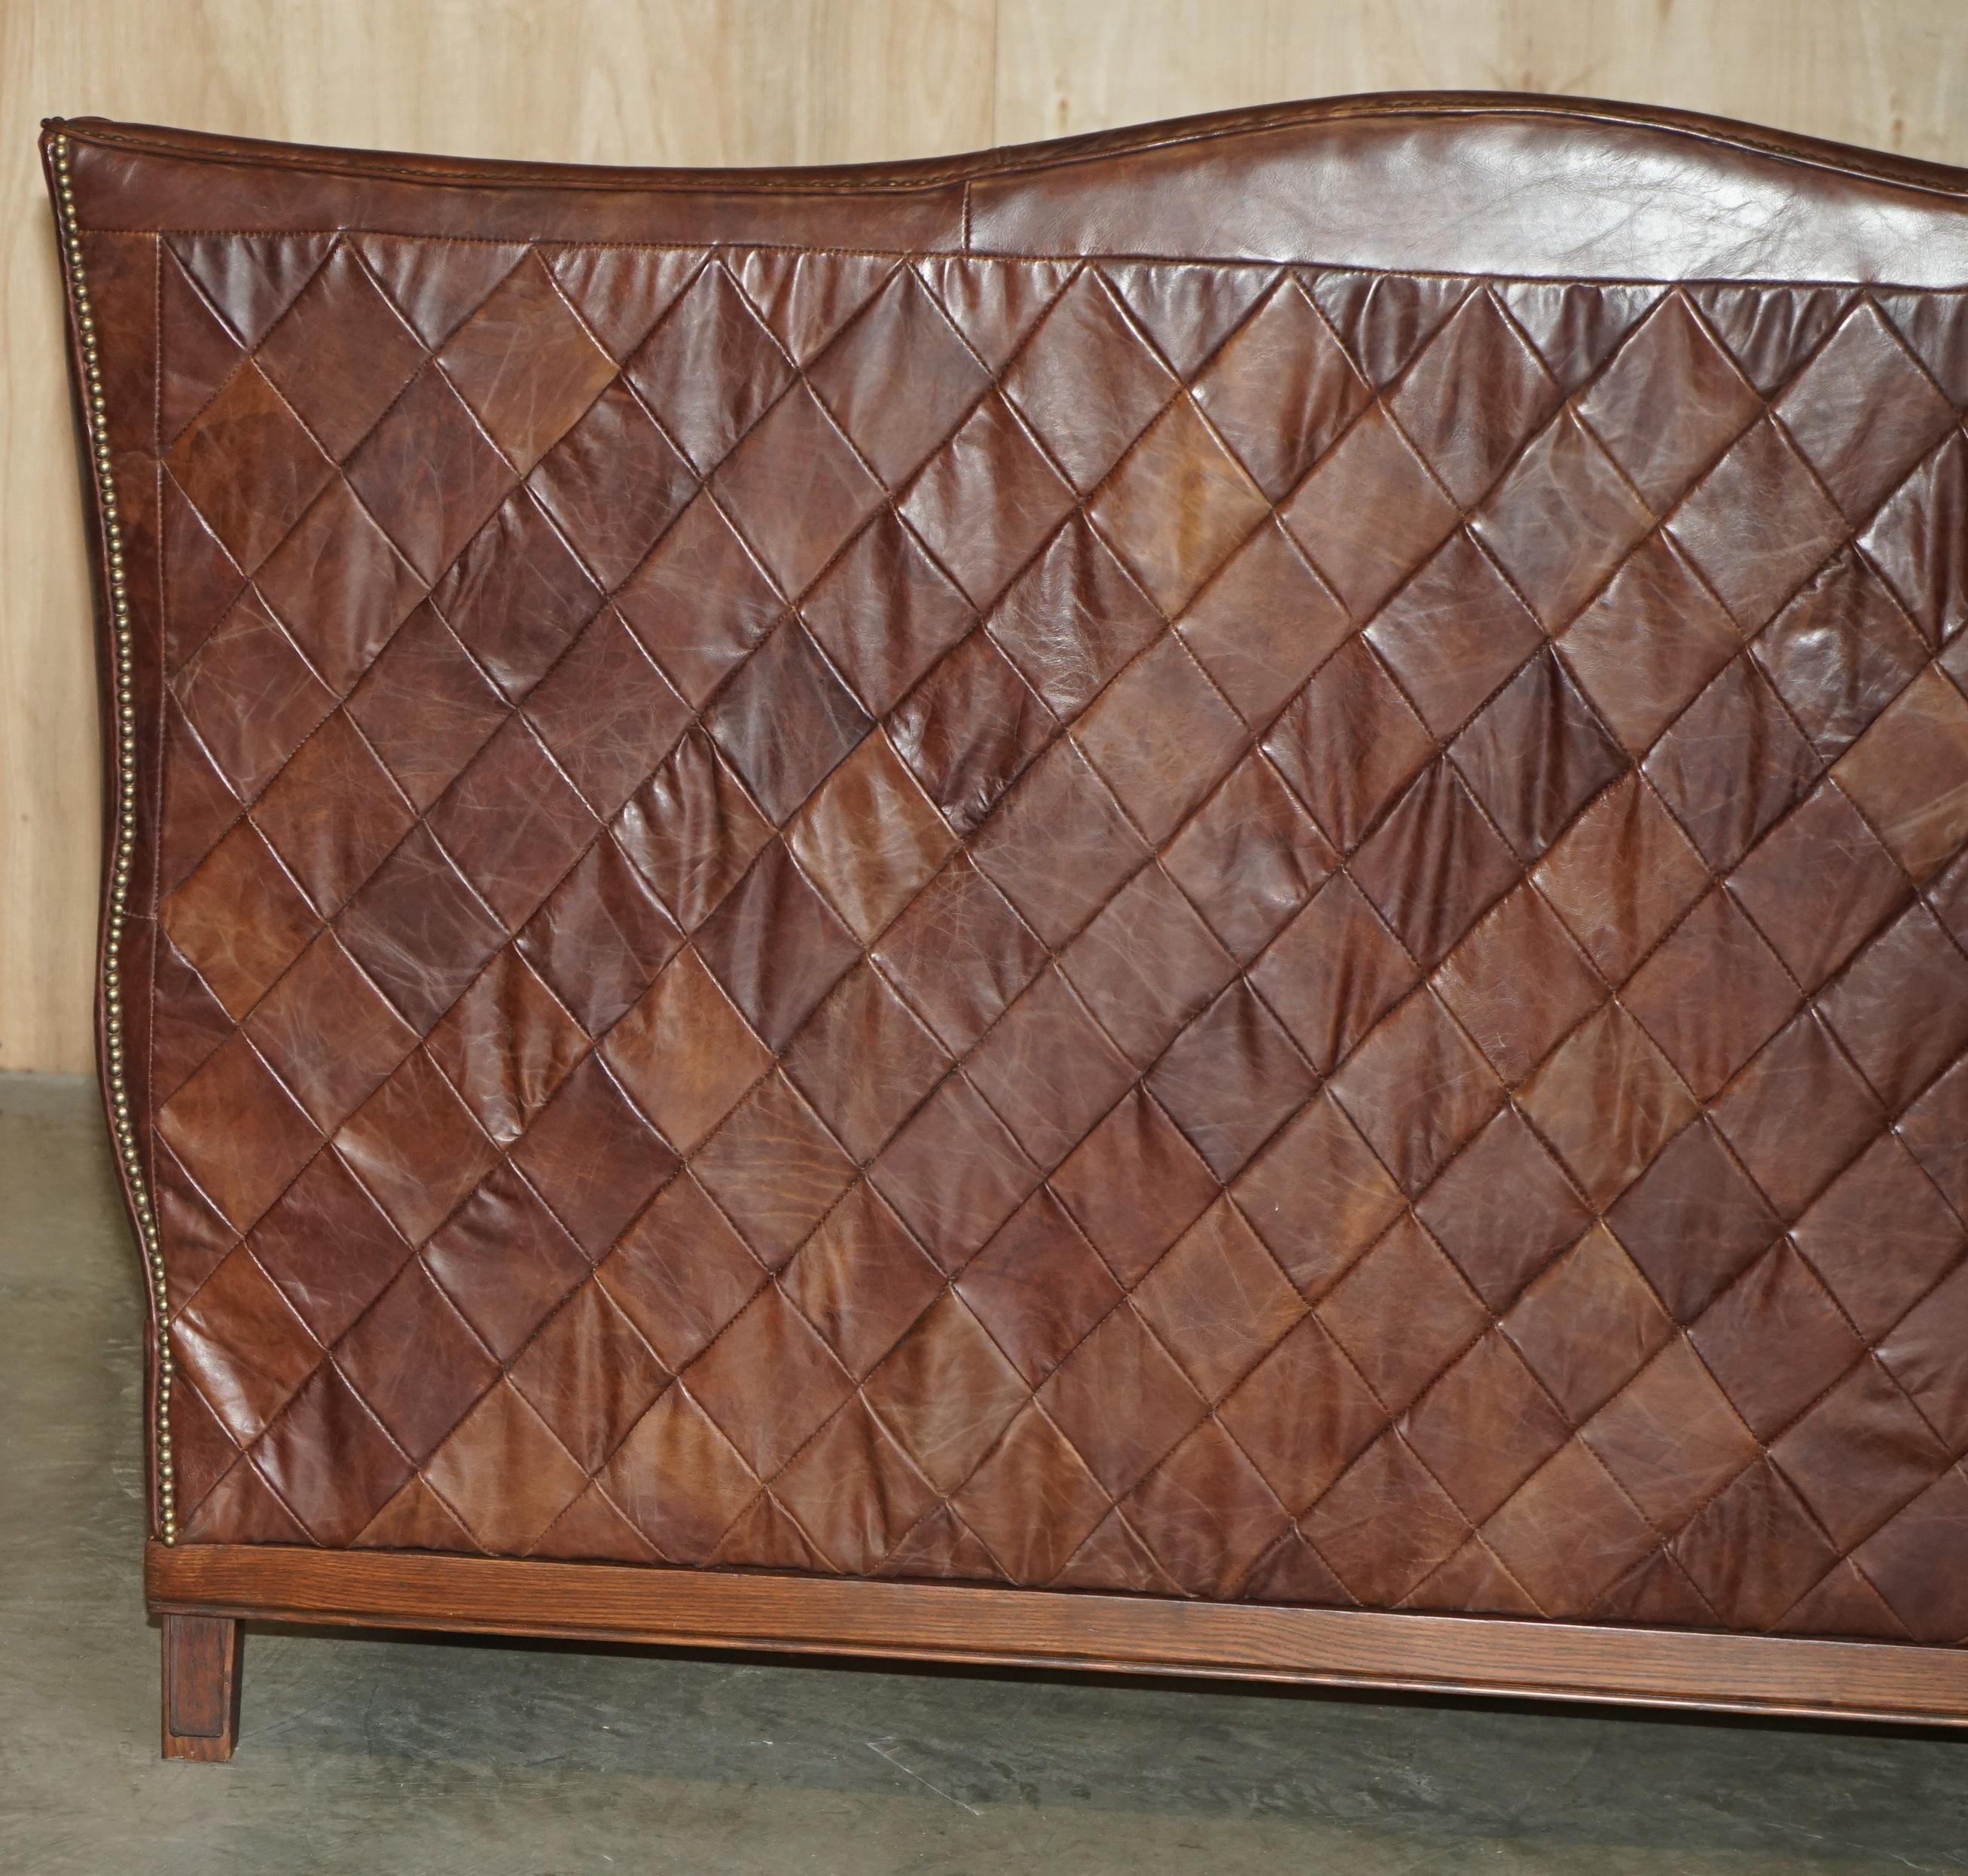 VERY RARE HUGE HAND DYED BROWN LEATHER WiNGBACK SUPER KING SIZE BED FRAME For Sale 2